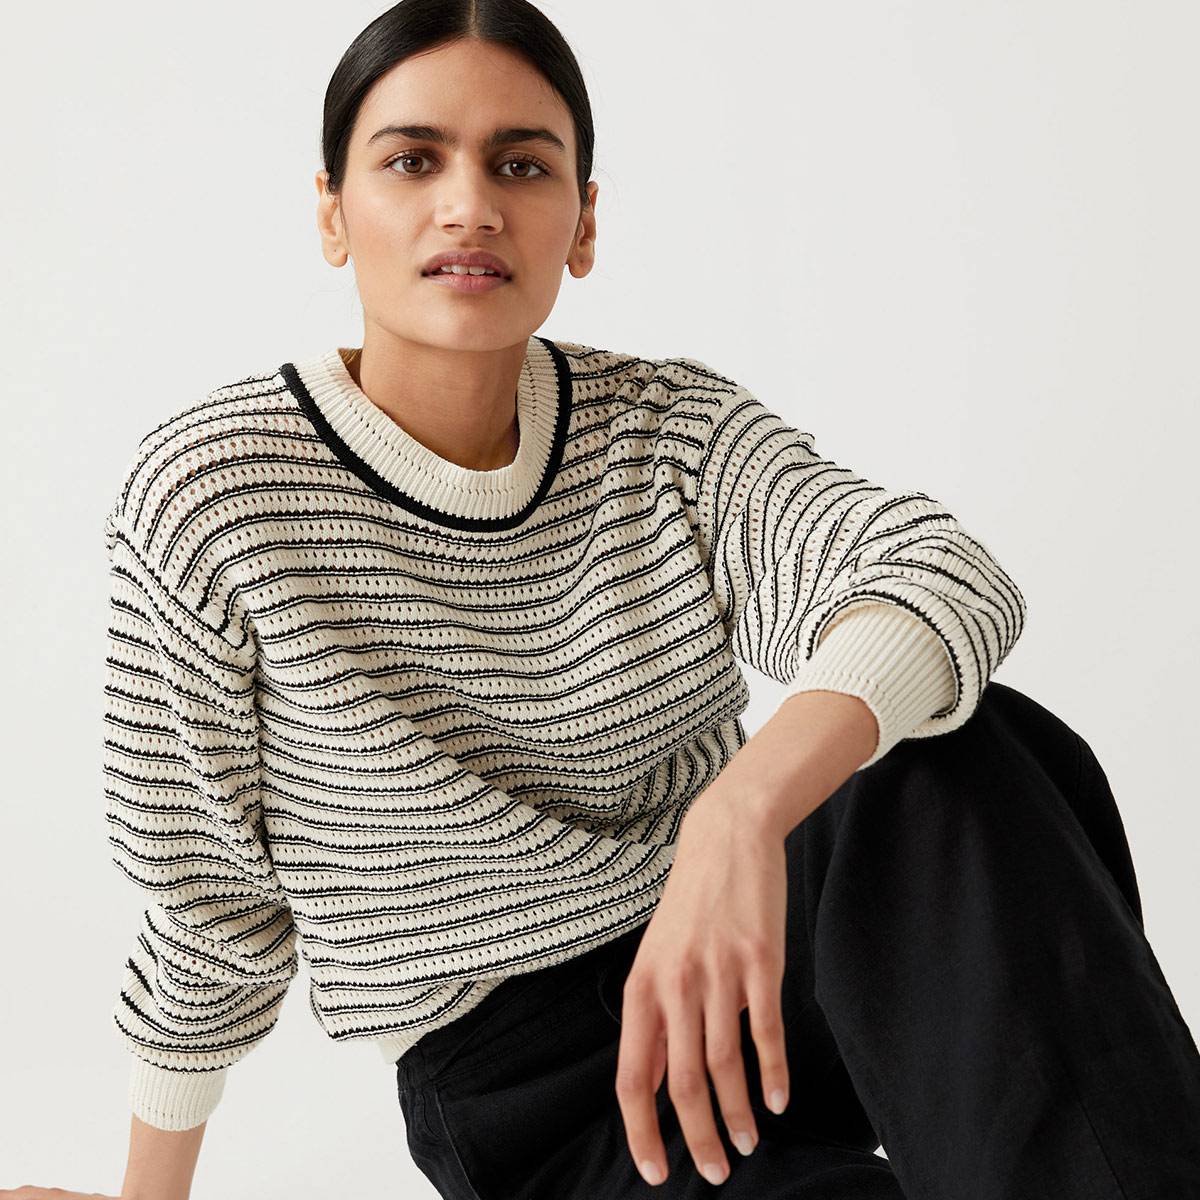  Model wearing black and white striped knit